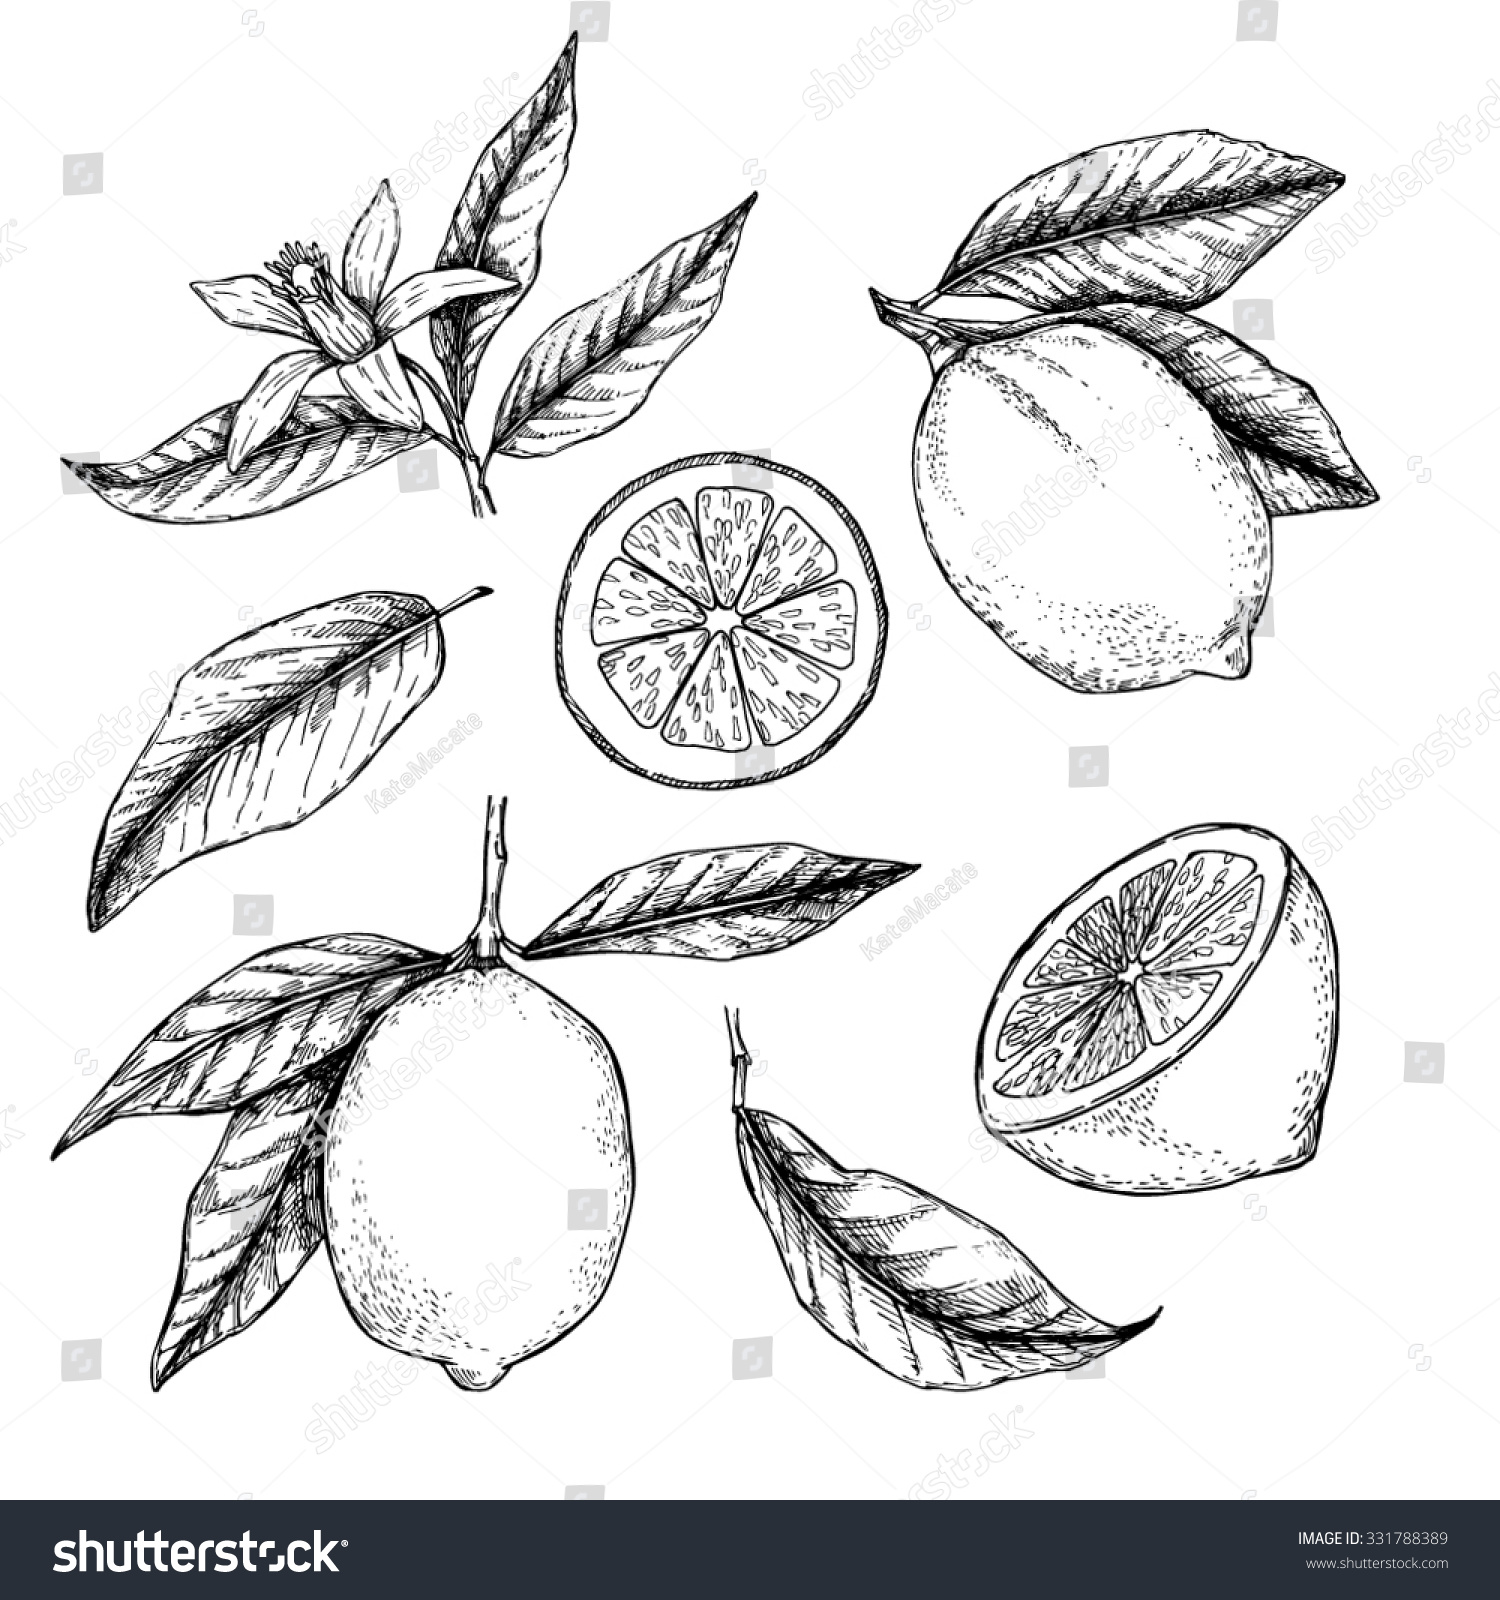 Hand drawn vector illustration - Collections of Lemons. Blossom plant with leaves #331788389